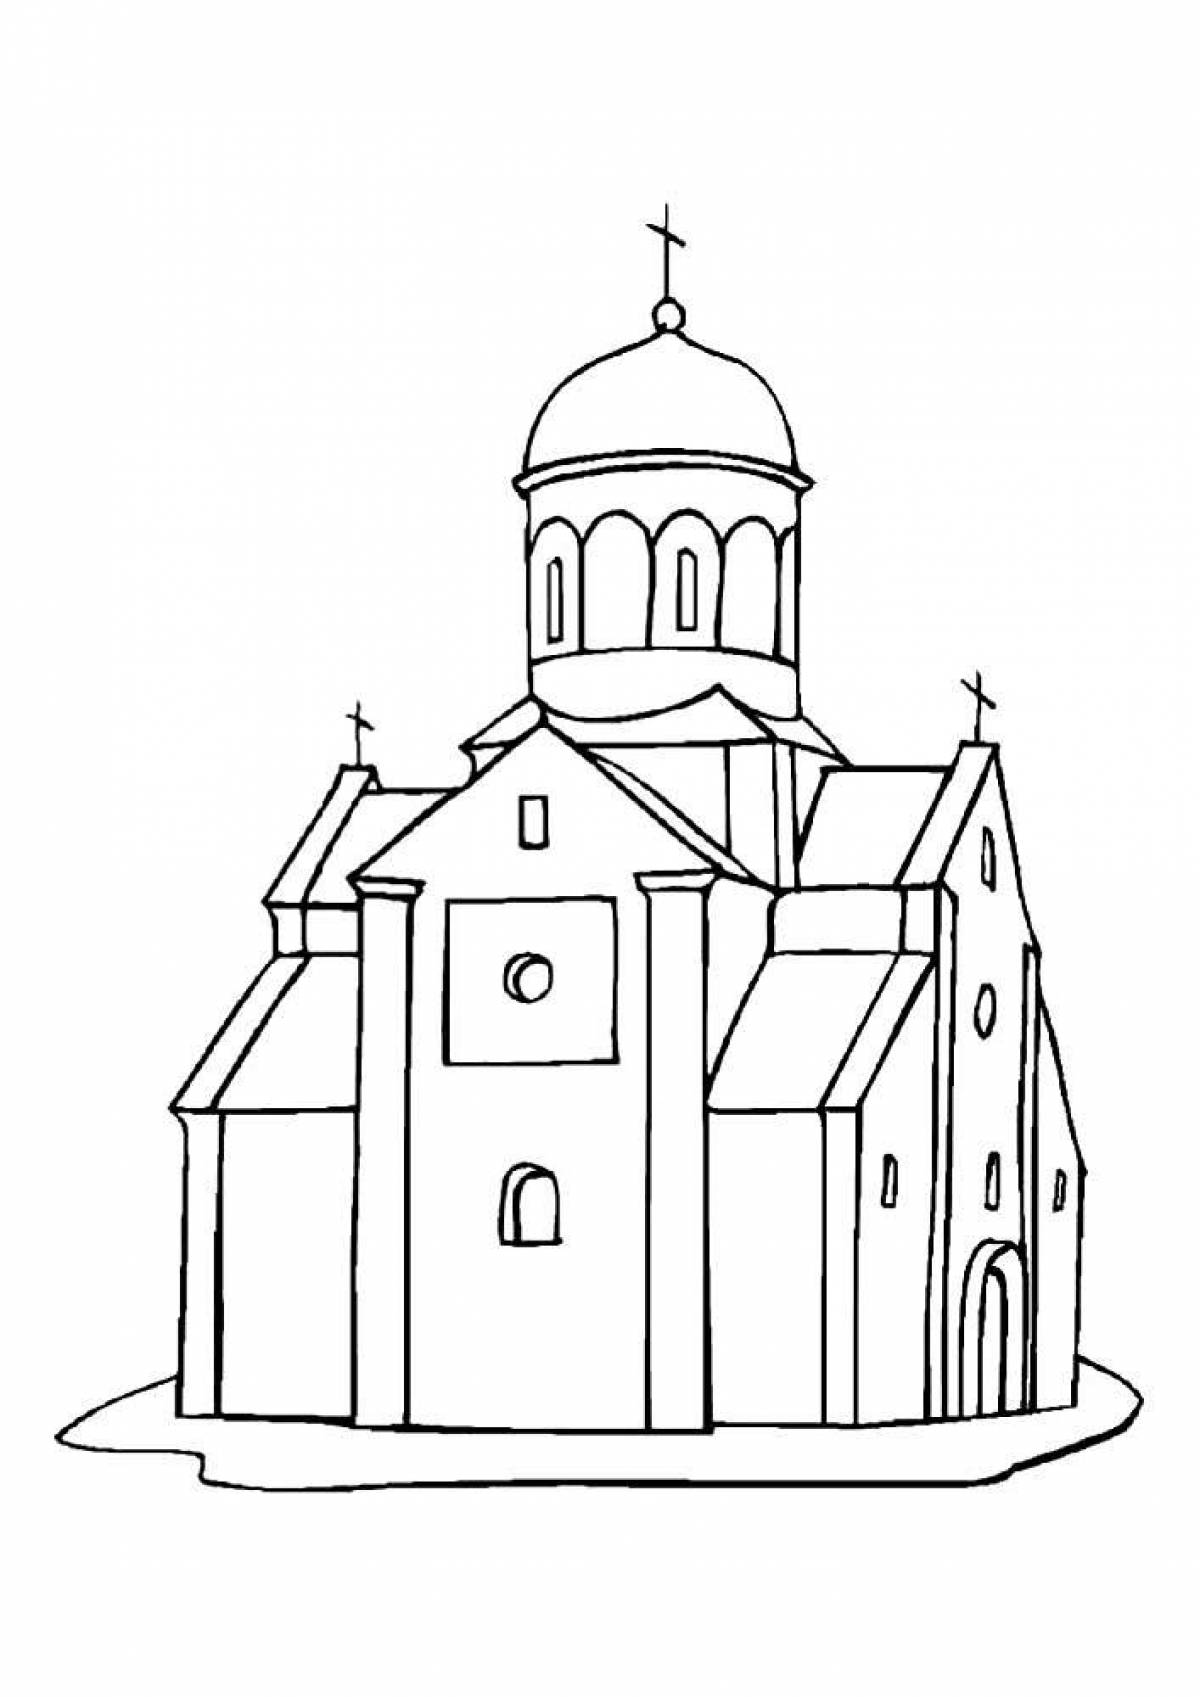 Coloring page beautiful church